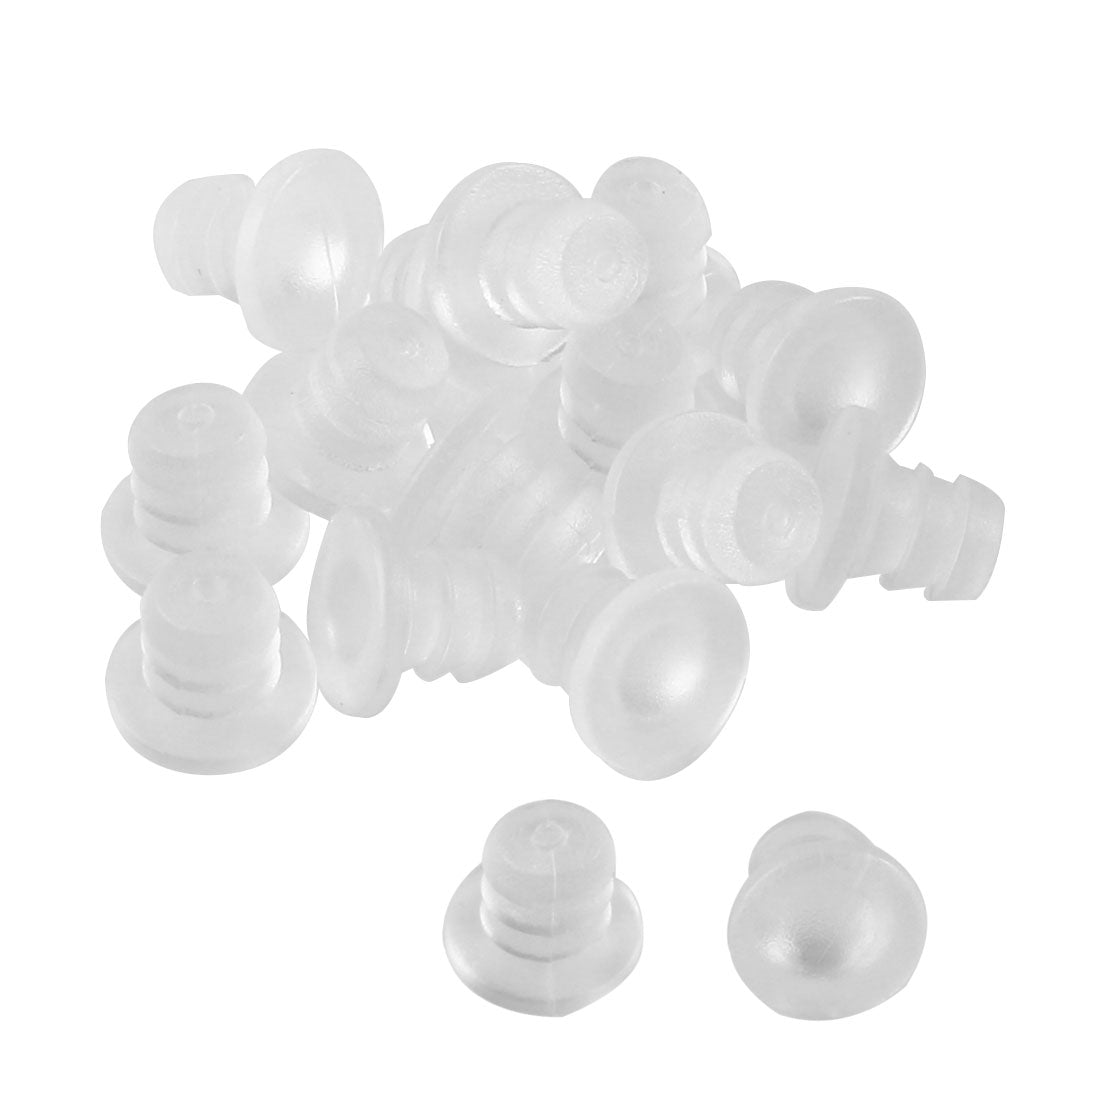 uxcell Uxcell 16pcs 5mm Soft Clear Stem Bumpers Glide, Patio Outdoor Furniture Glass Table Top Anti-collision Embedded